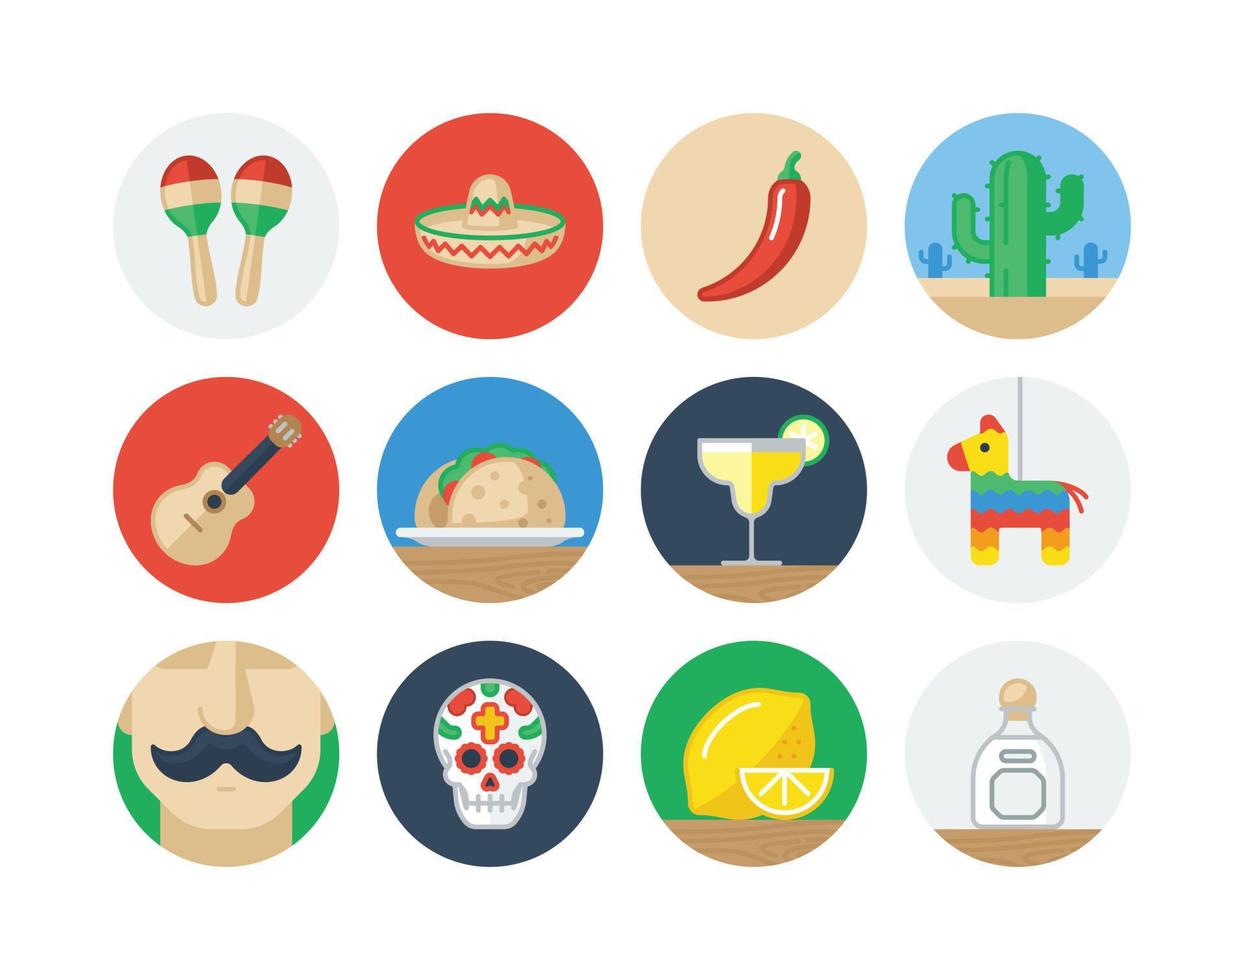 Cinco de Mayo and day of the dead flat circle icon set with Mexico related icons vector